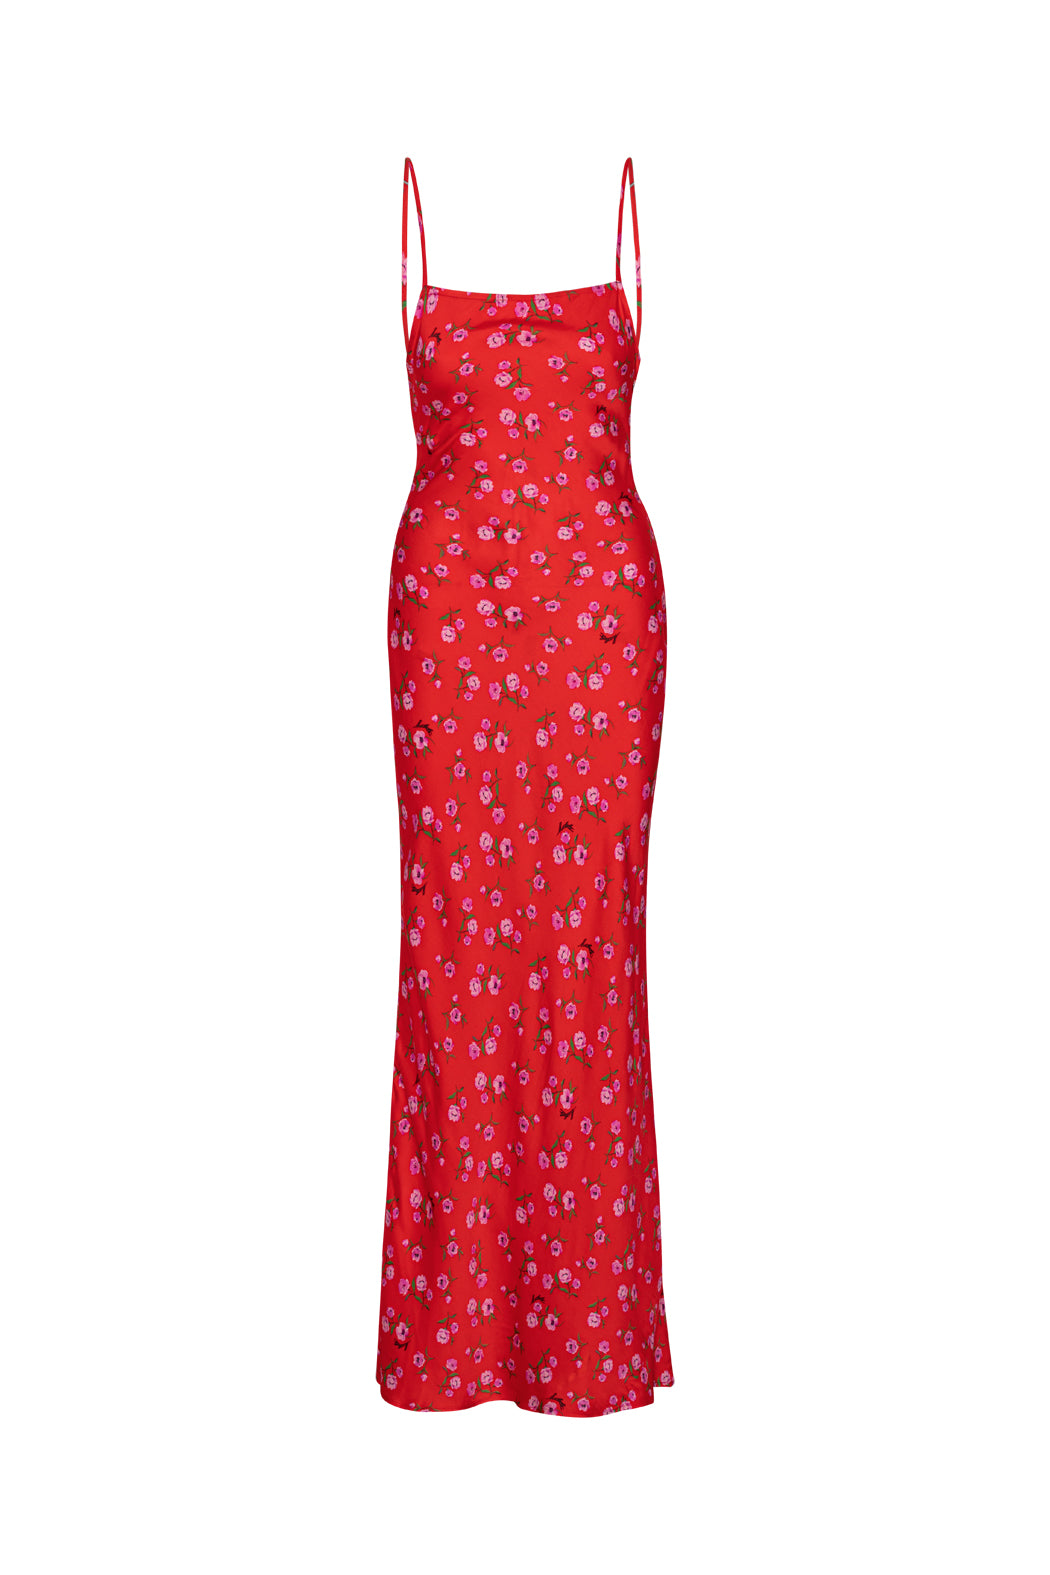 Printed Maxi Dress - Wildeve Cluster + High
Risk Red Comb